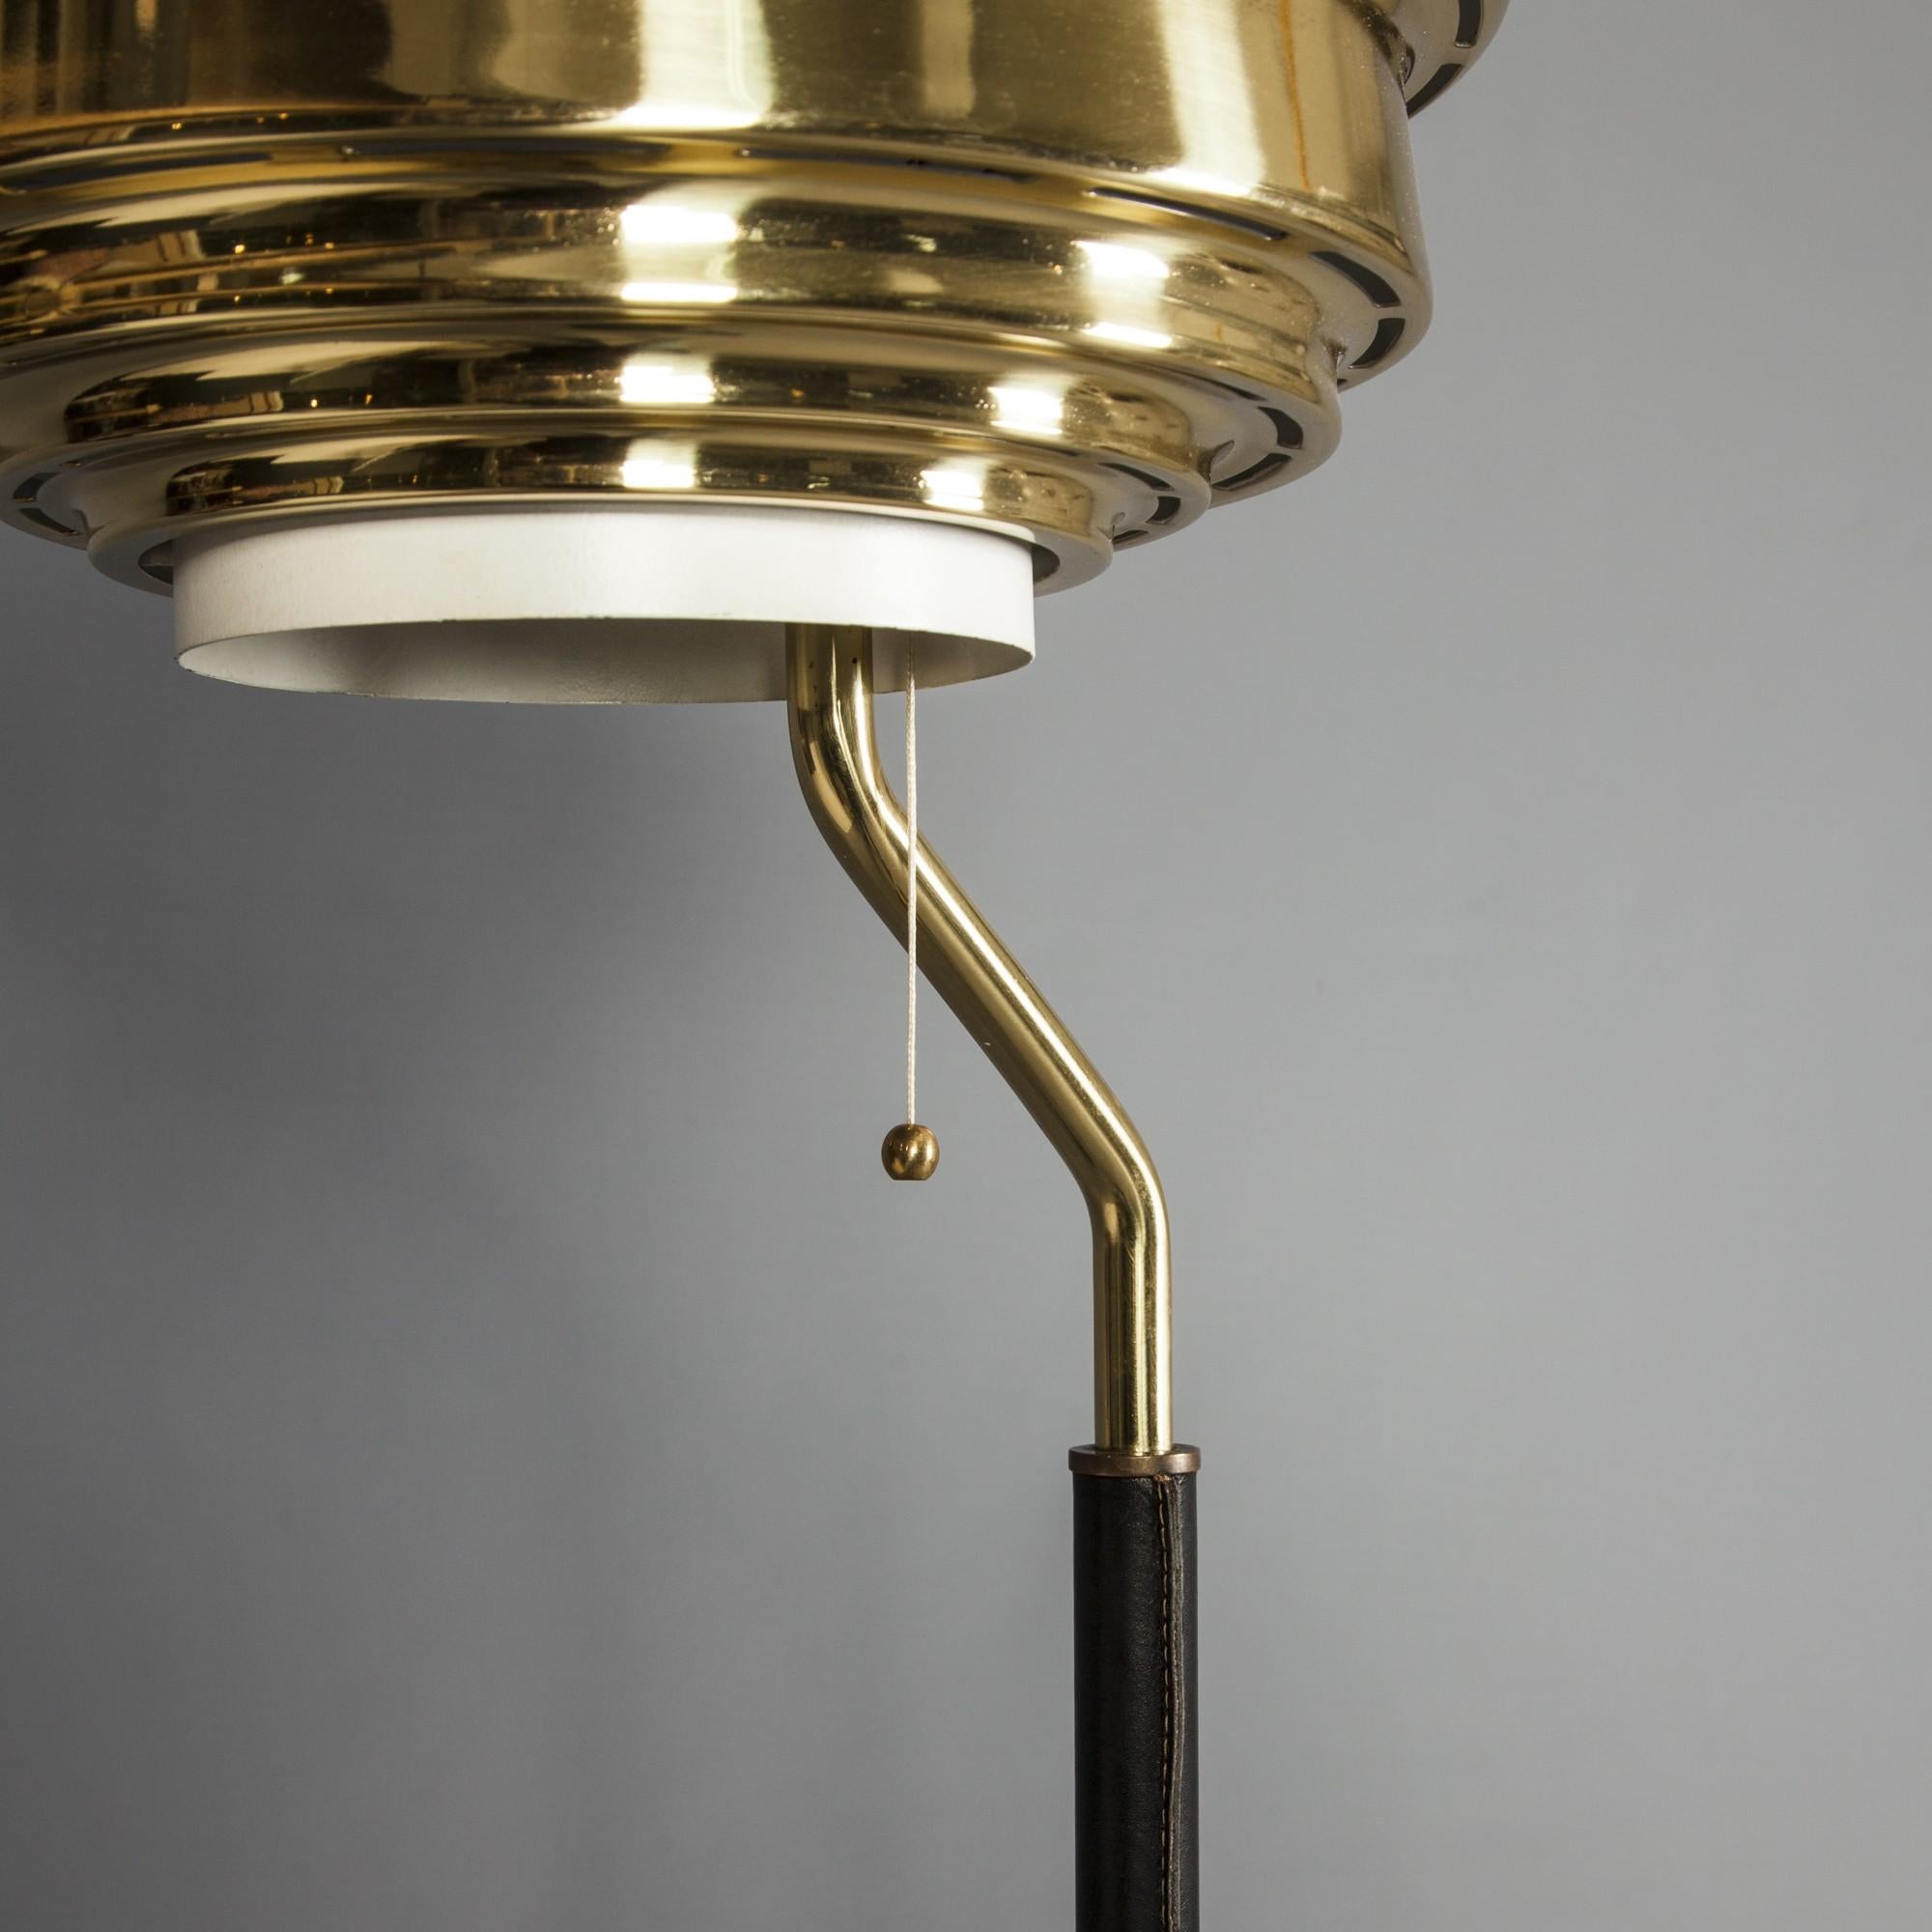 An Alvar Alto floor lamp edited by Valaitustyo Ky in the early 1950s. Brass shade, white metal; black leather-covered lamp stand. Early edition. Top impressed with 